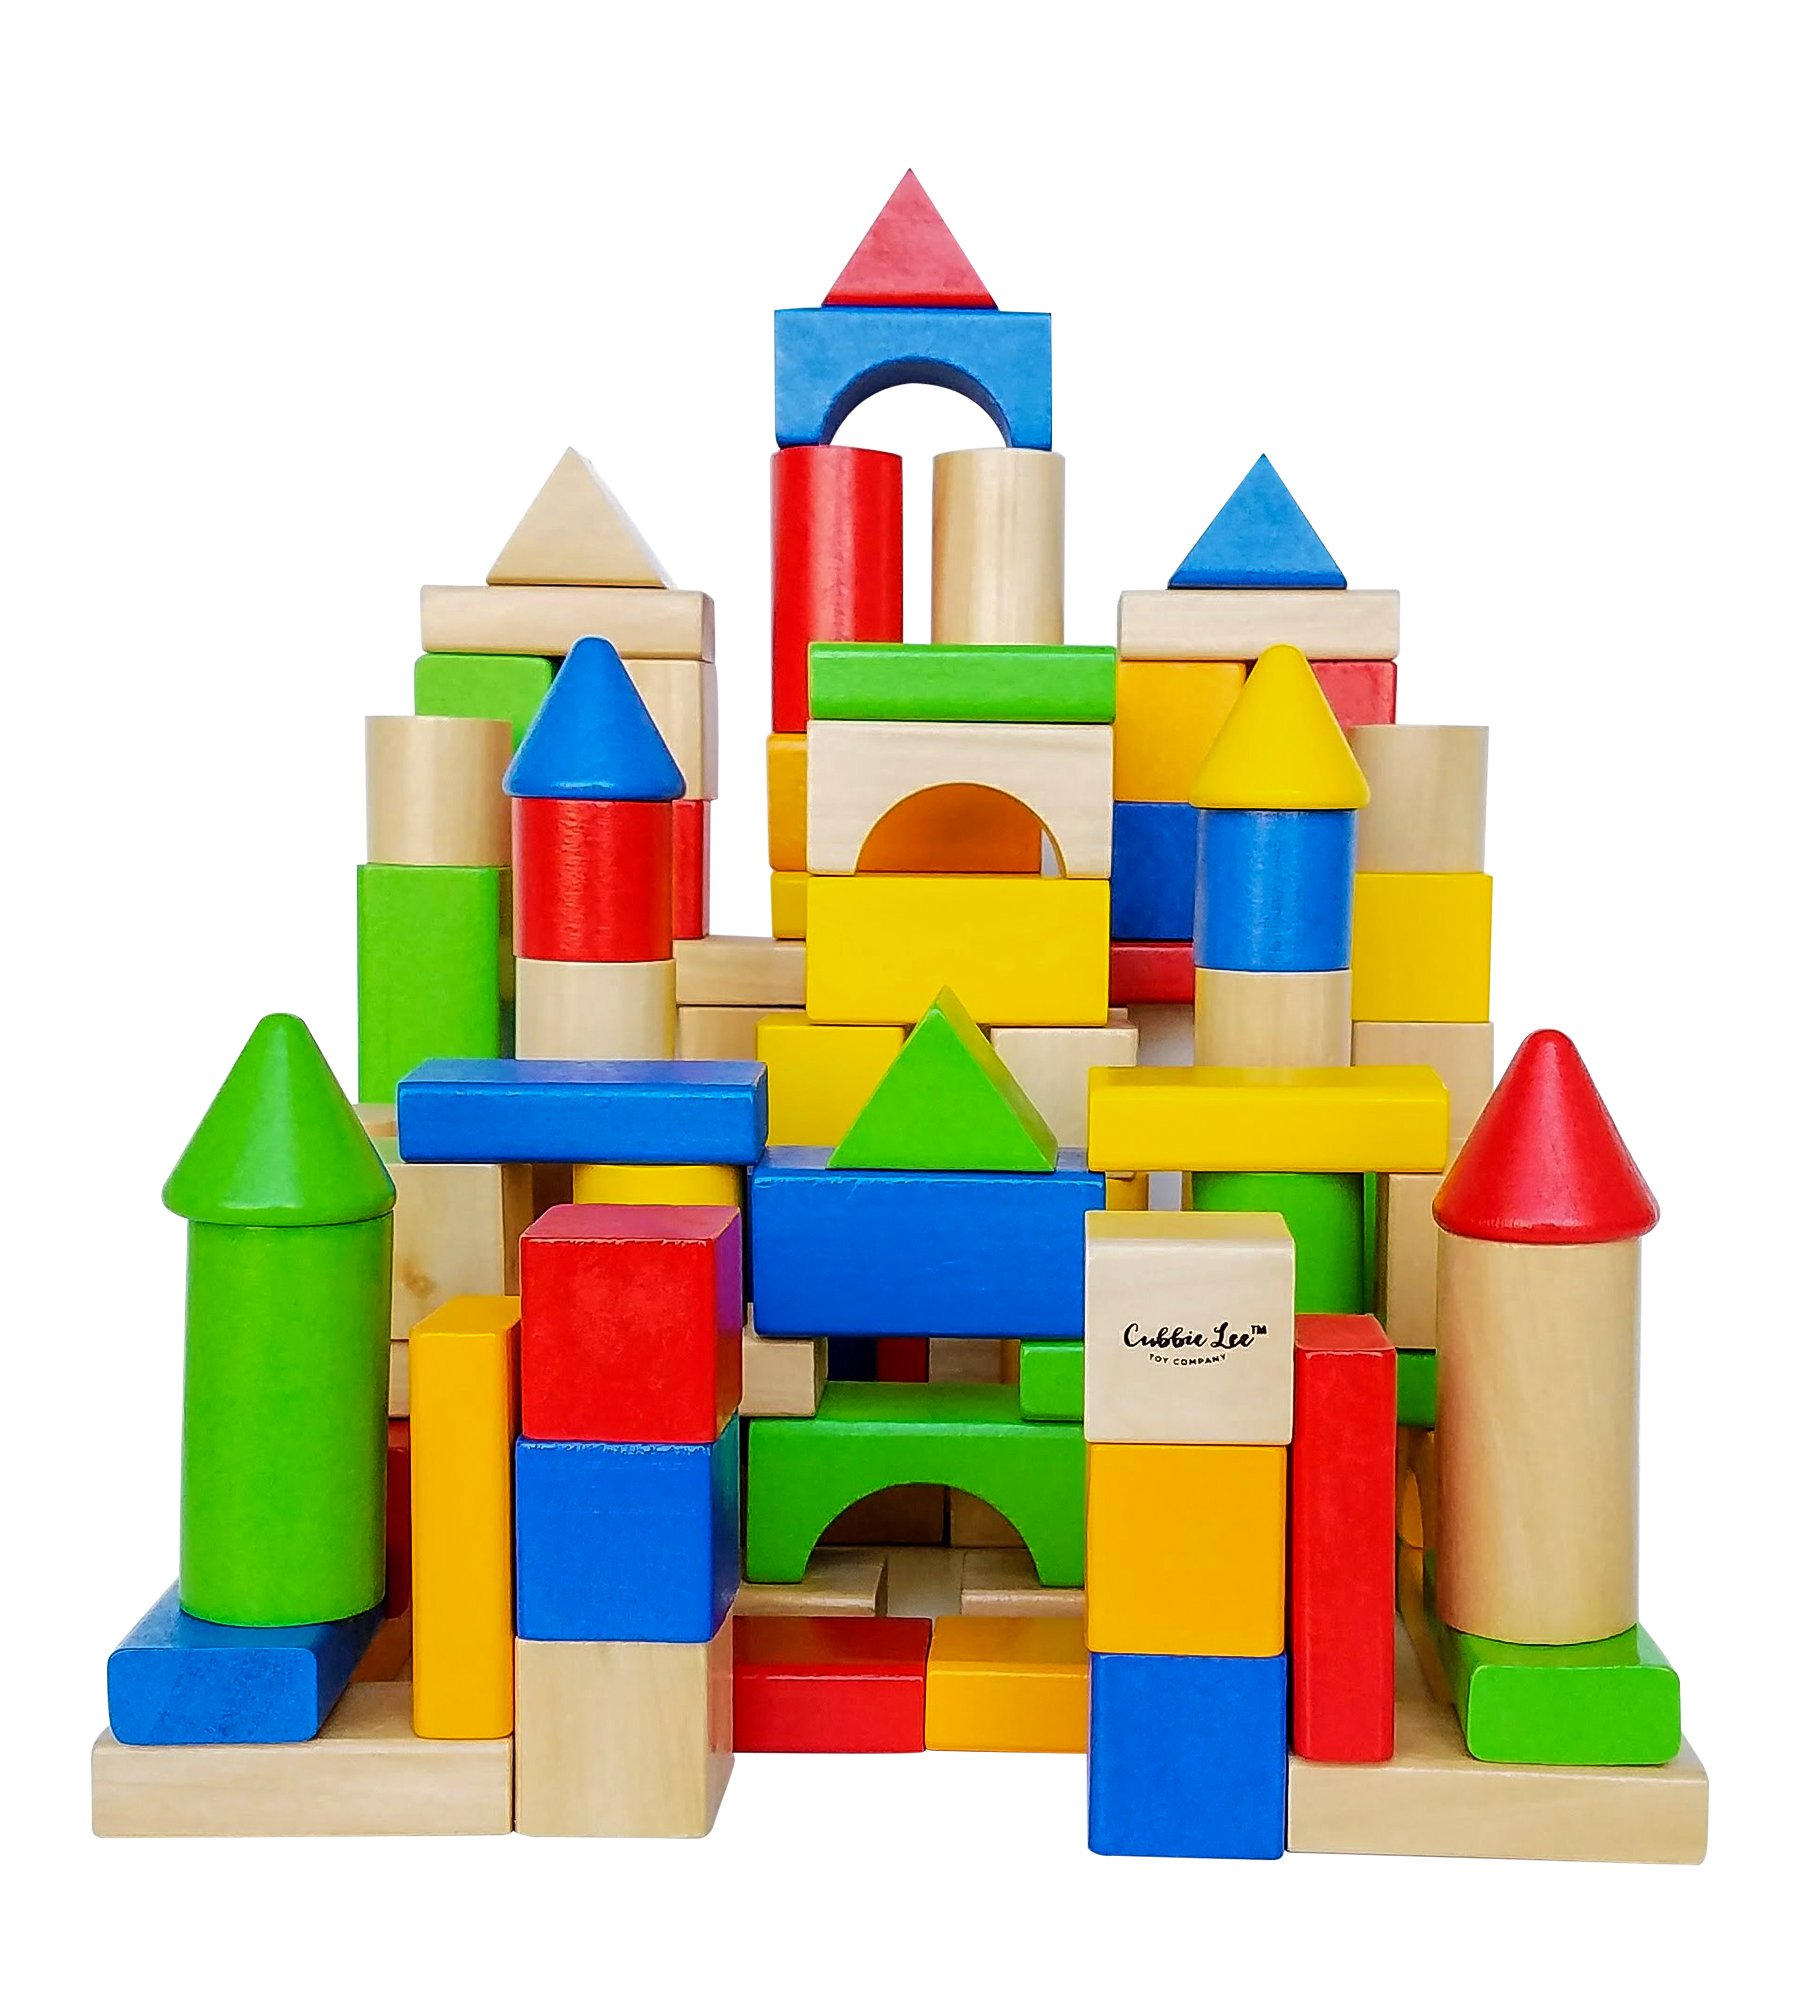 Cubbie Lee Premium Wooden Building Blocks Set - 100 pc for Toddlers Preschool Age - Classic Hardwood Plain & Colored Small Wood Block Pieces for Boys & Girls - Classic Build & Play Toy